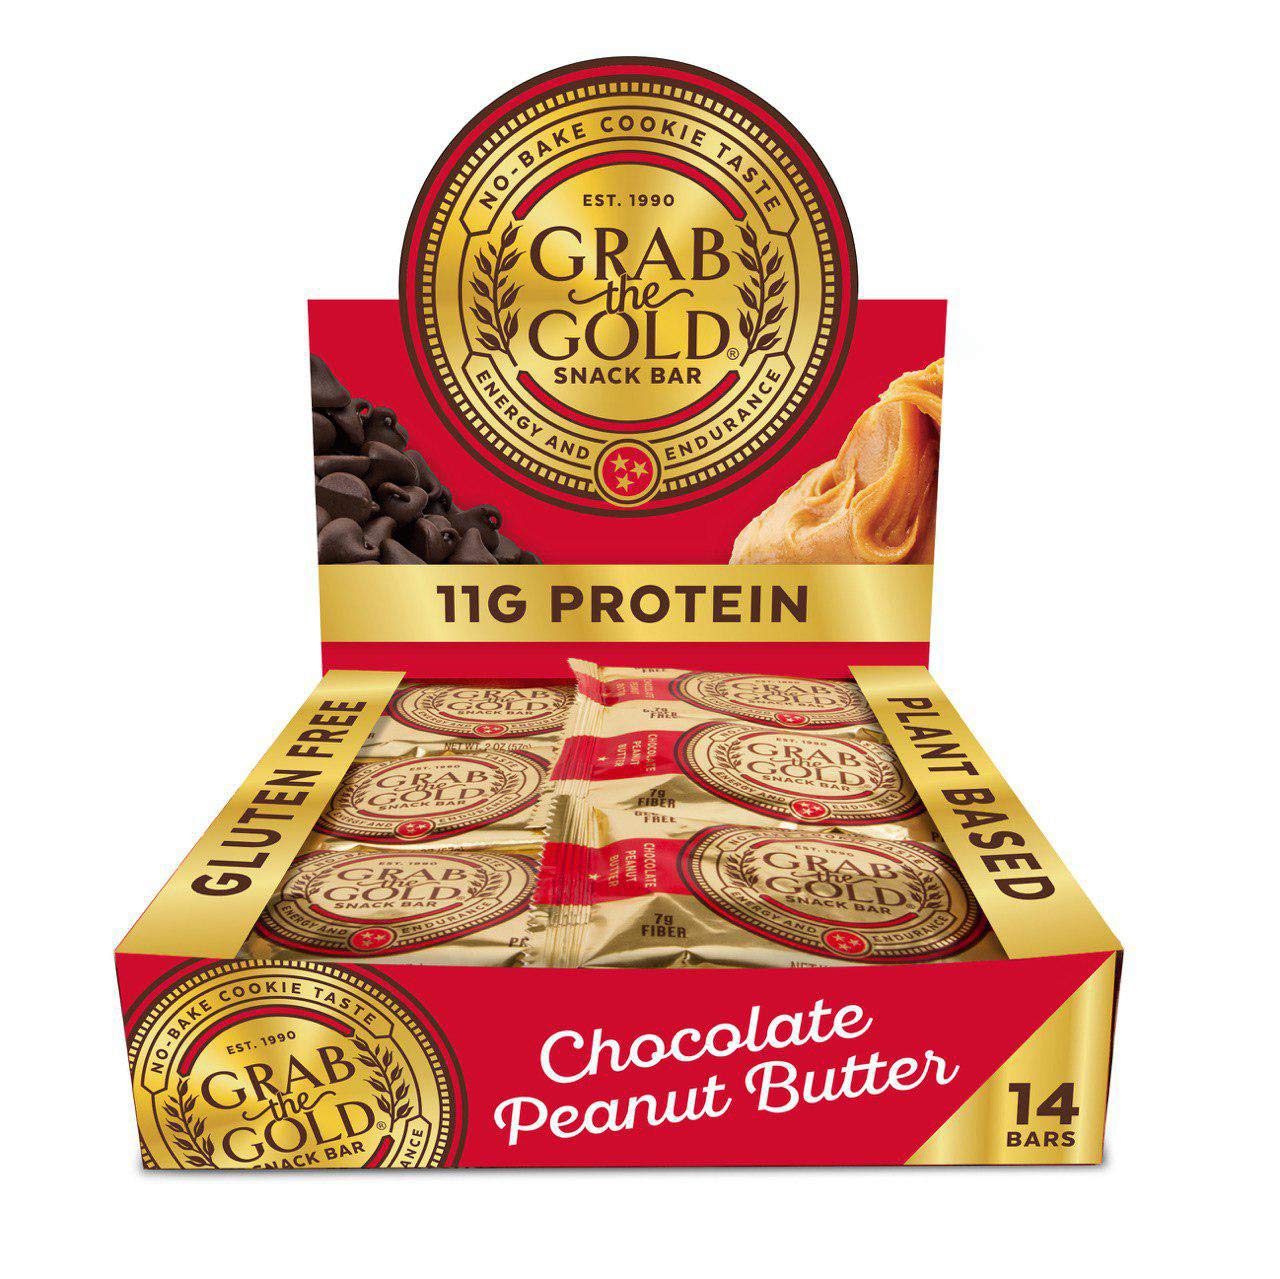 Snack Bars by Grab The Gold - Organic, Gluten Free, Vegan, Kosher, & Dairy Free - 11g of Protein - Chocolate Peanut Butter (14 Count)